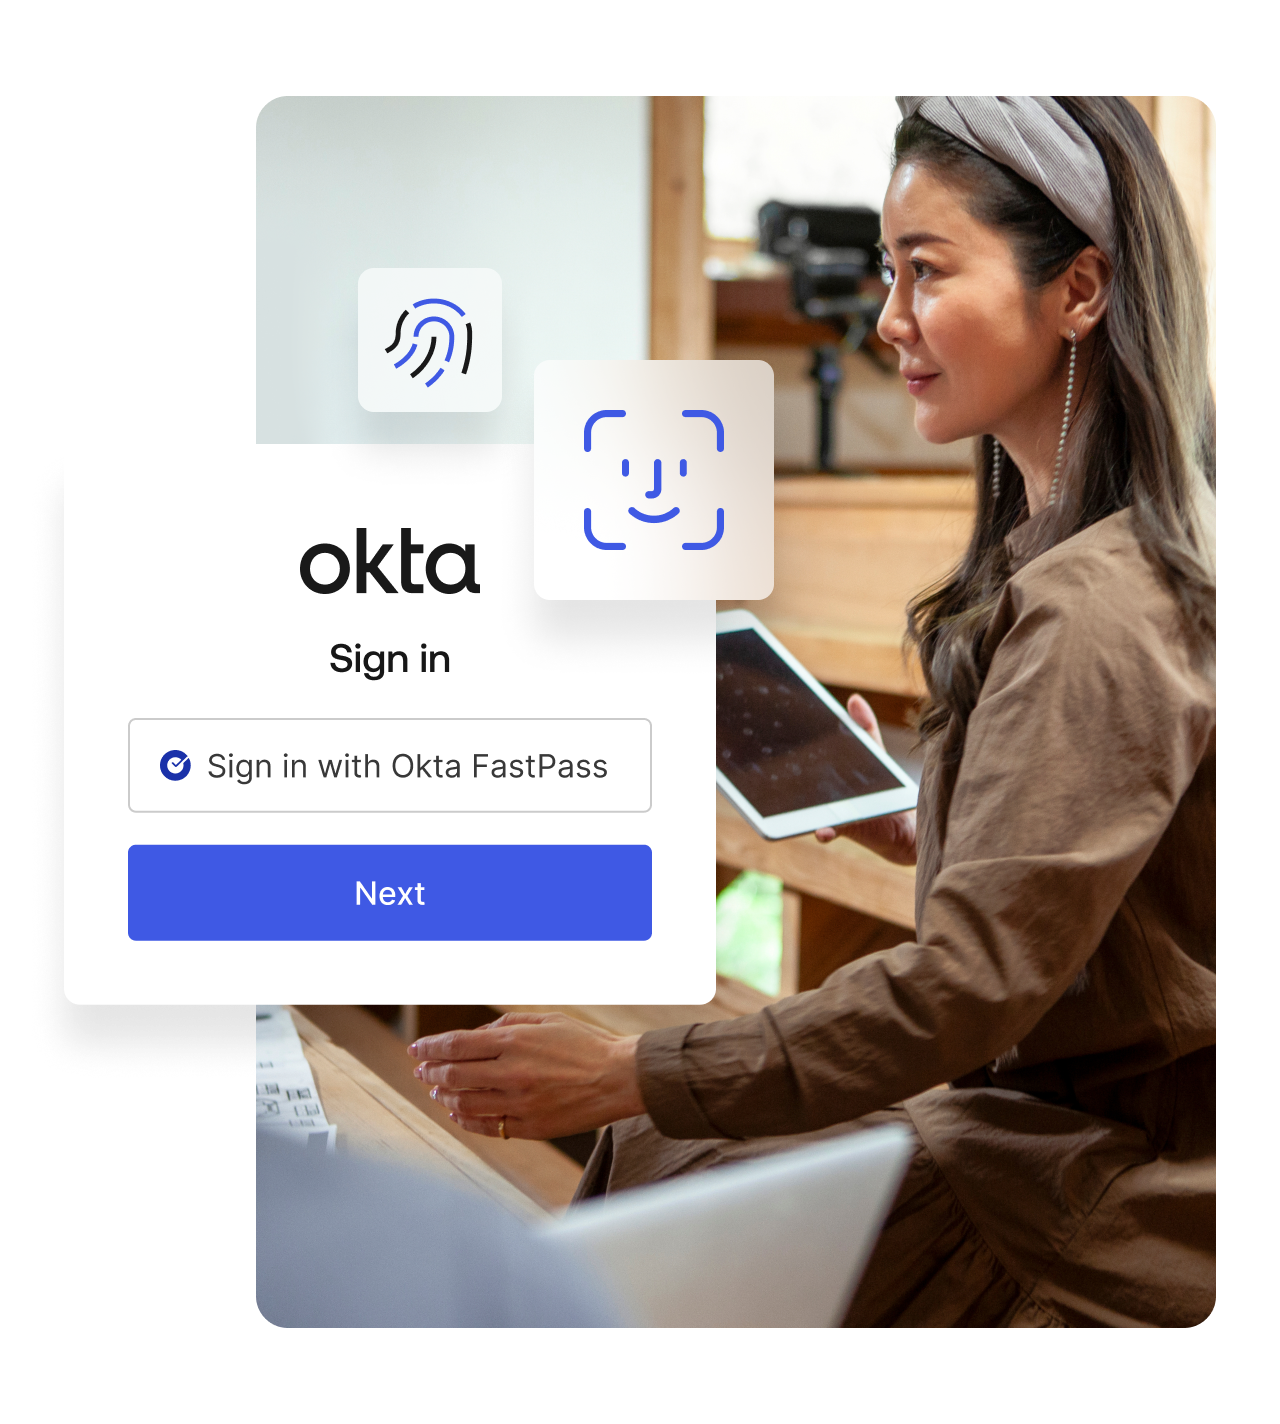 A graphic of an Okta FastPass sign-in pop-up window layered over an image of a woman holding a tablet.